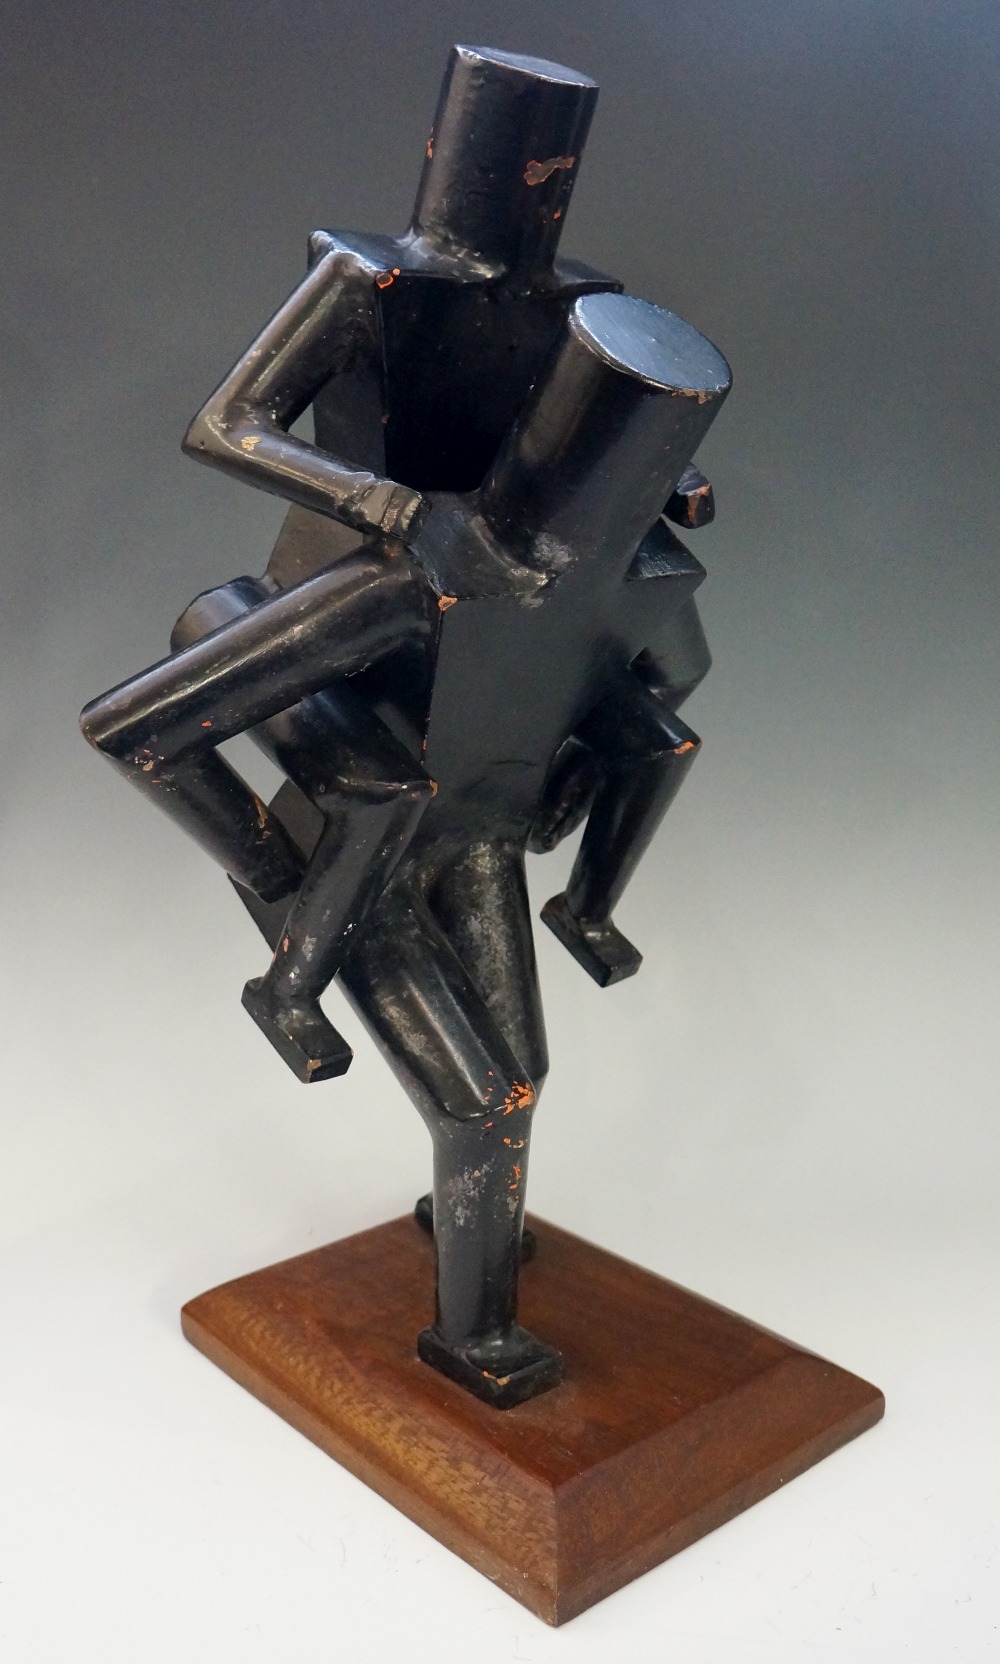 A Modernist sculpture of a figure carrying another figure on its back,